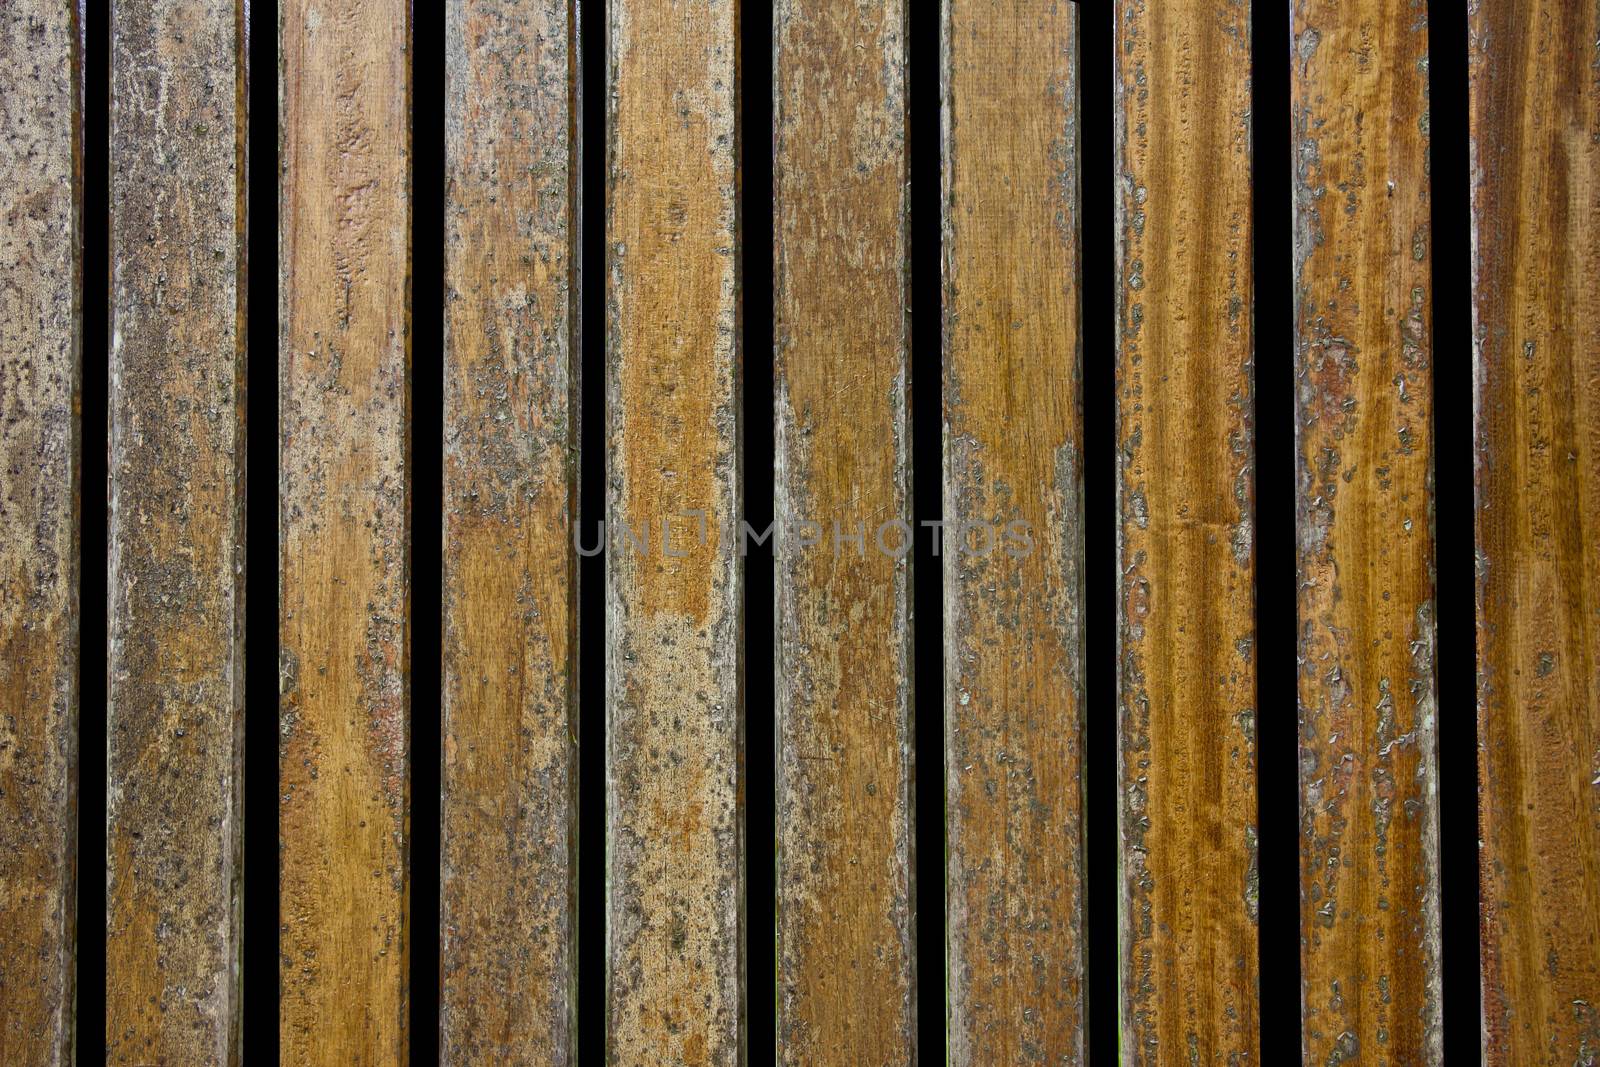 Wooden fence texture in isolated on black